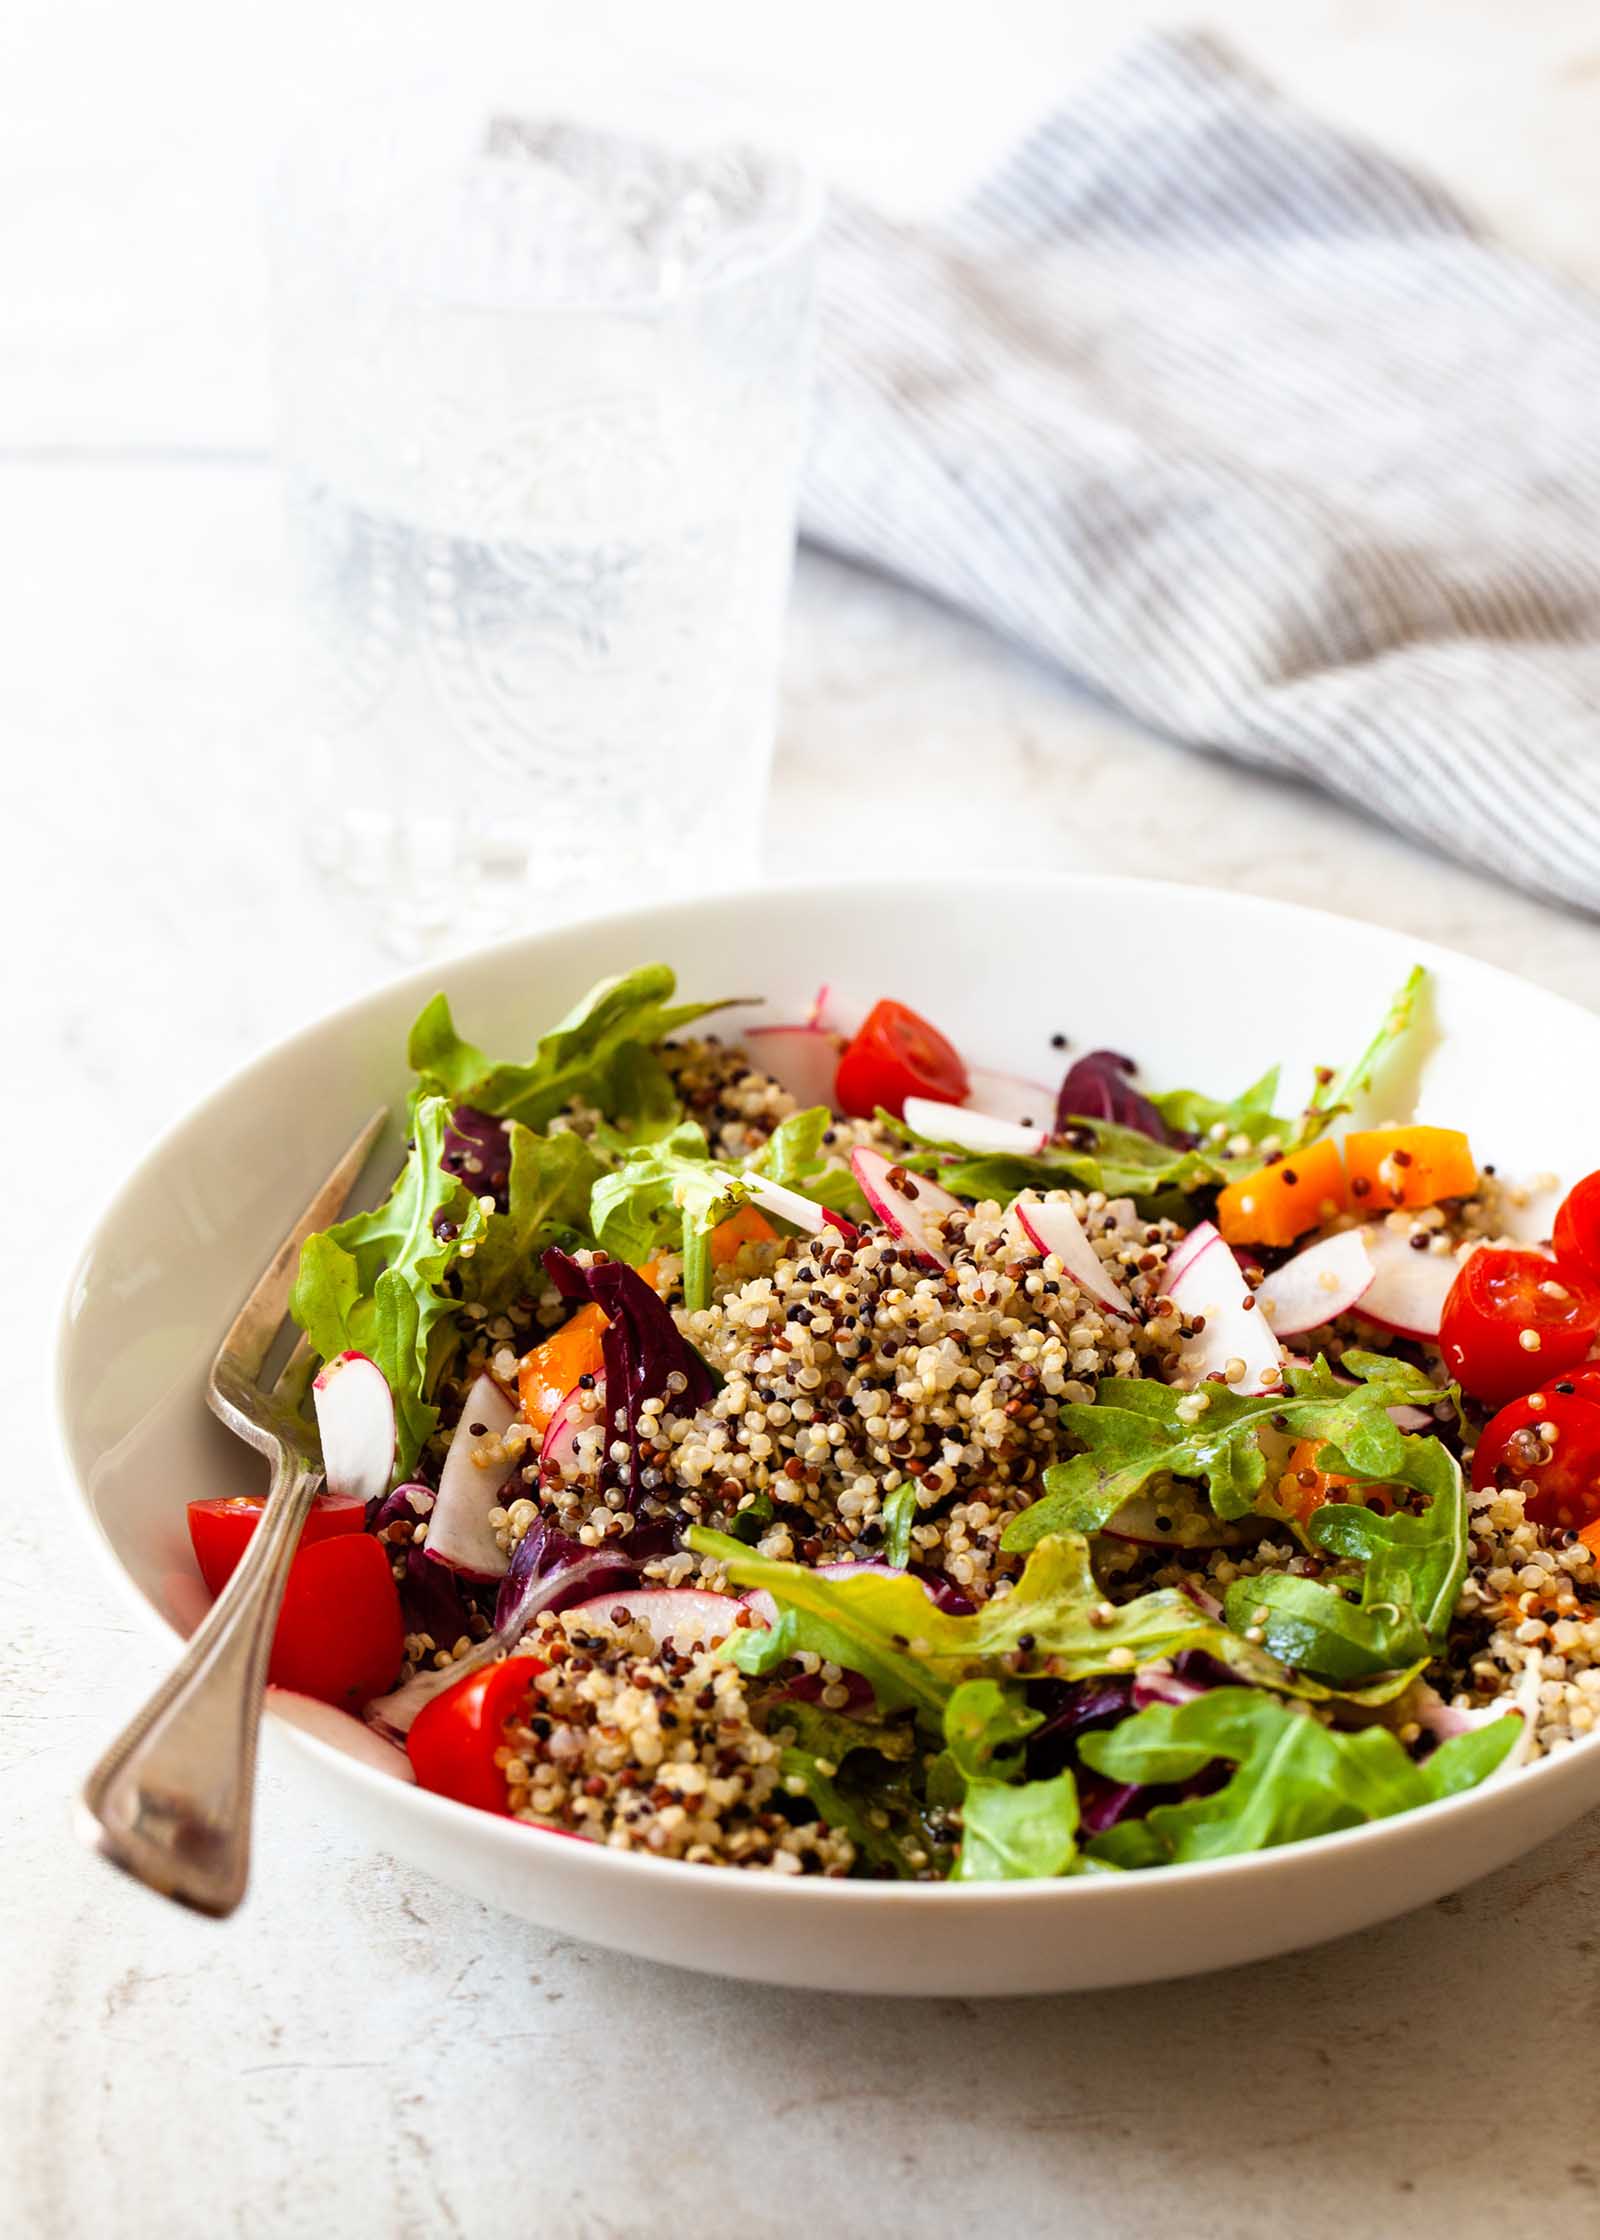 Perfect quinoa in a bowl along with lettuce, tomatoes, radish and a fork.